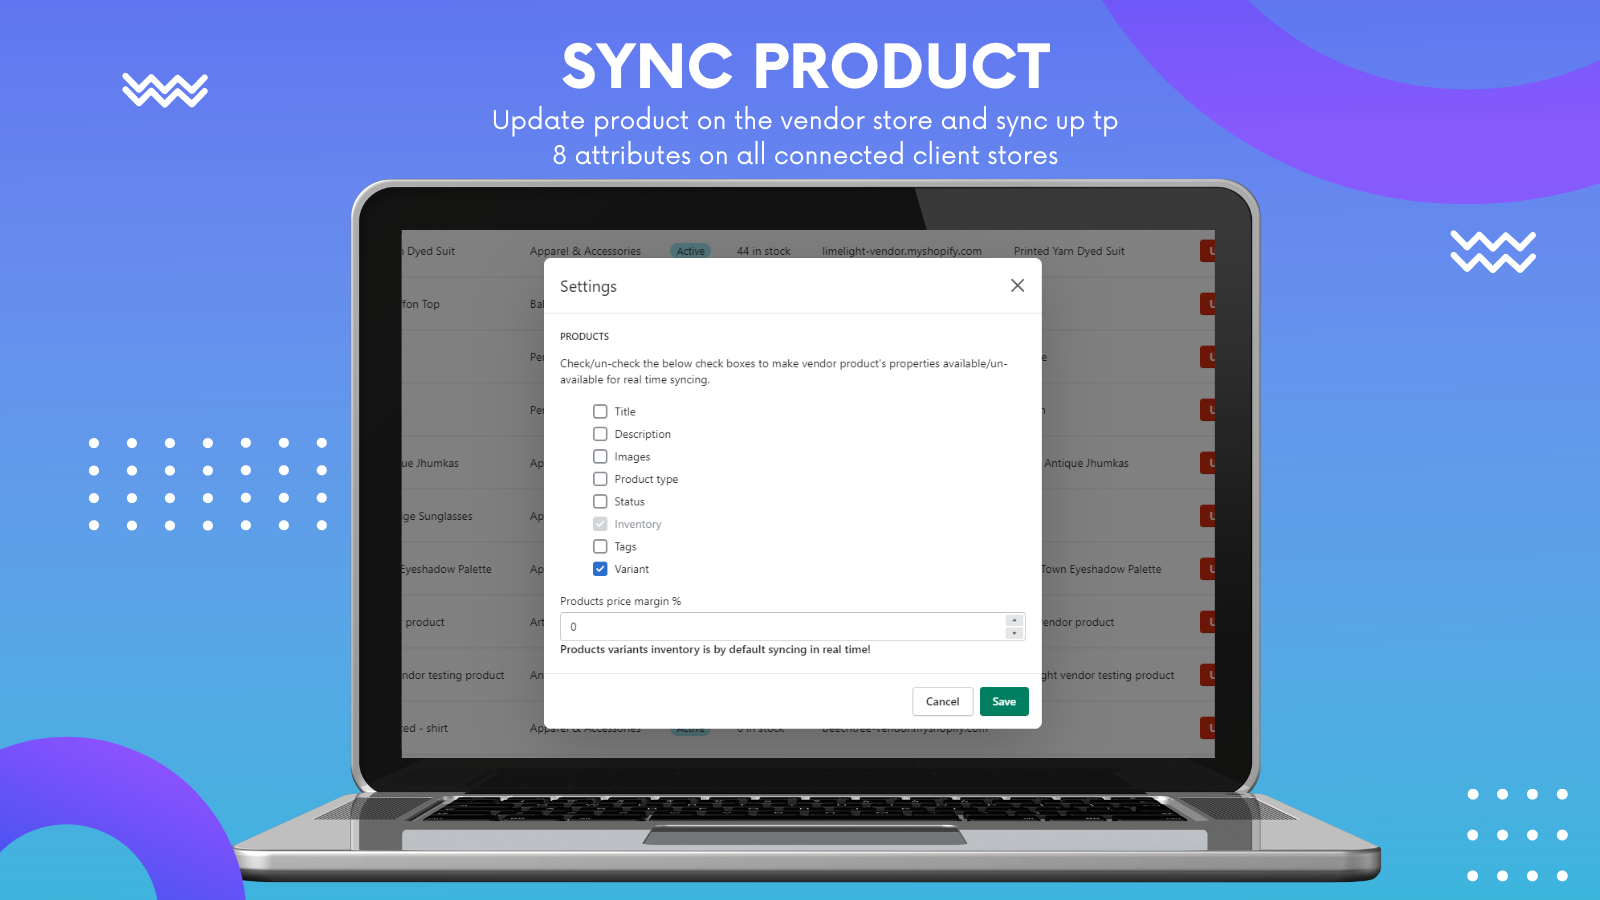 Sync product across multiple stores